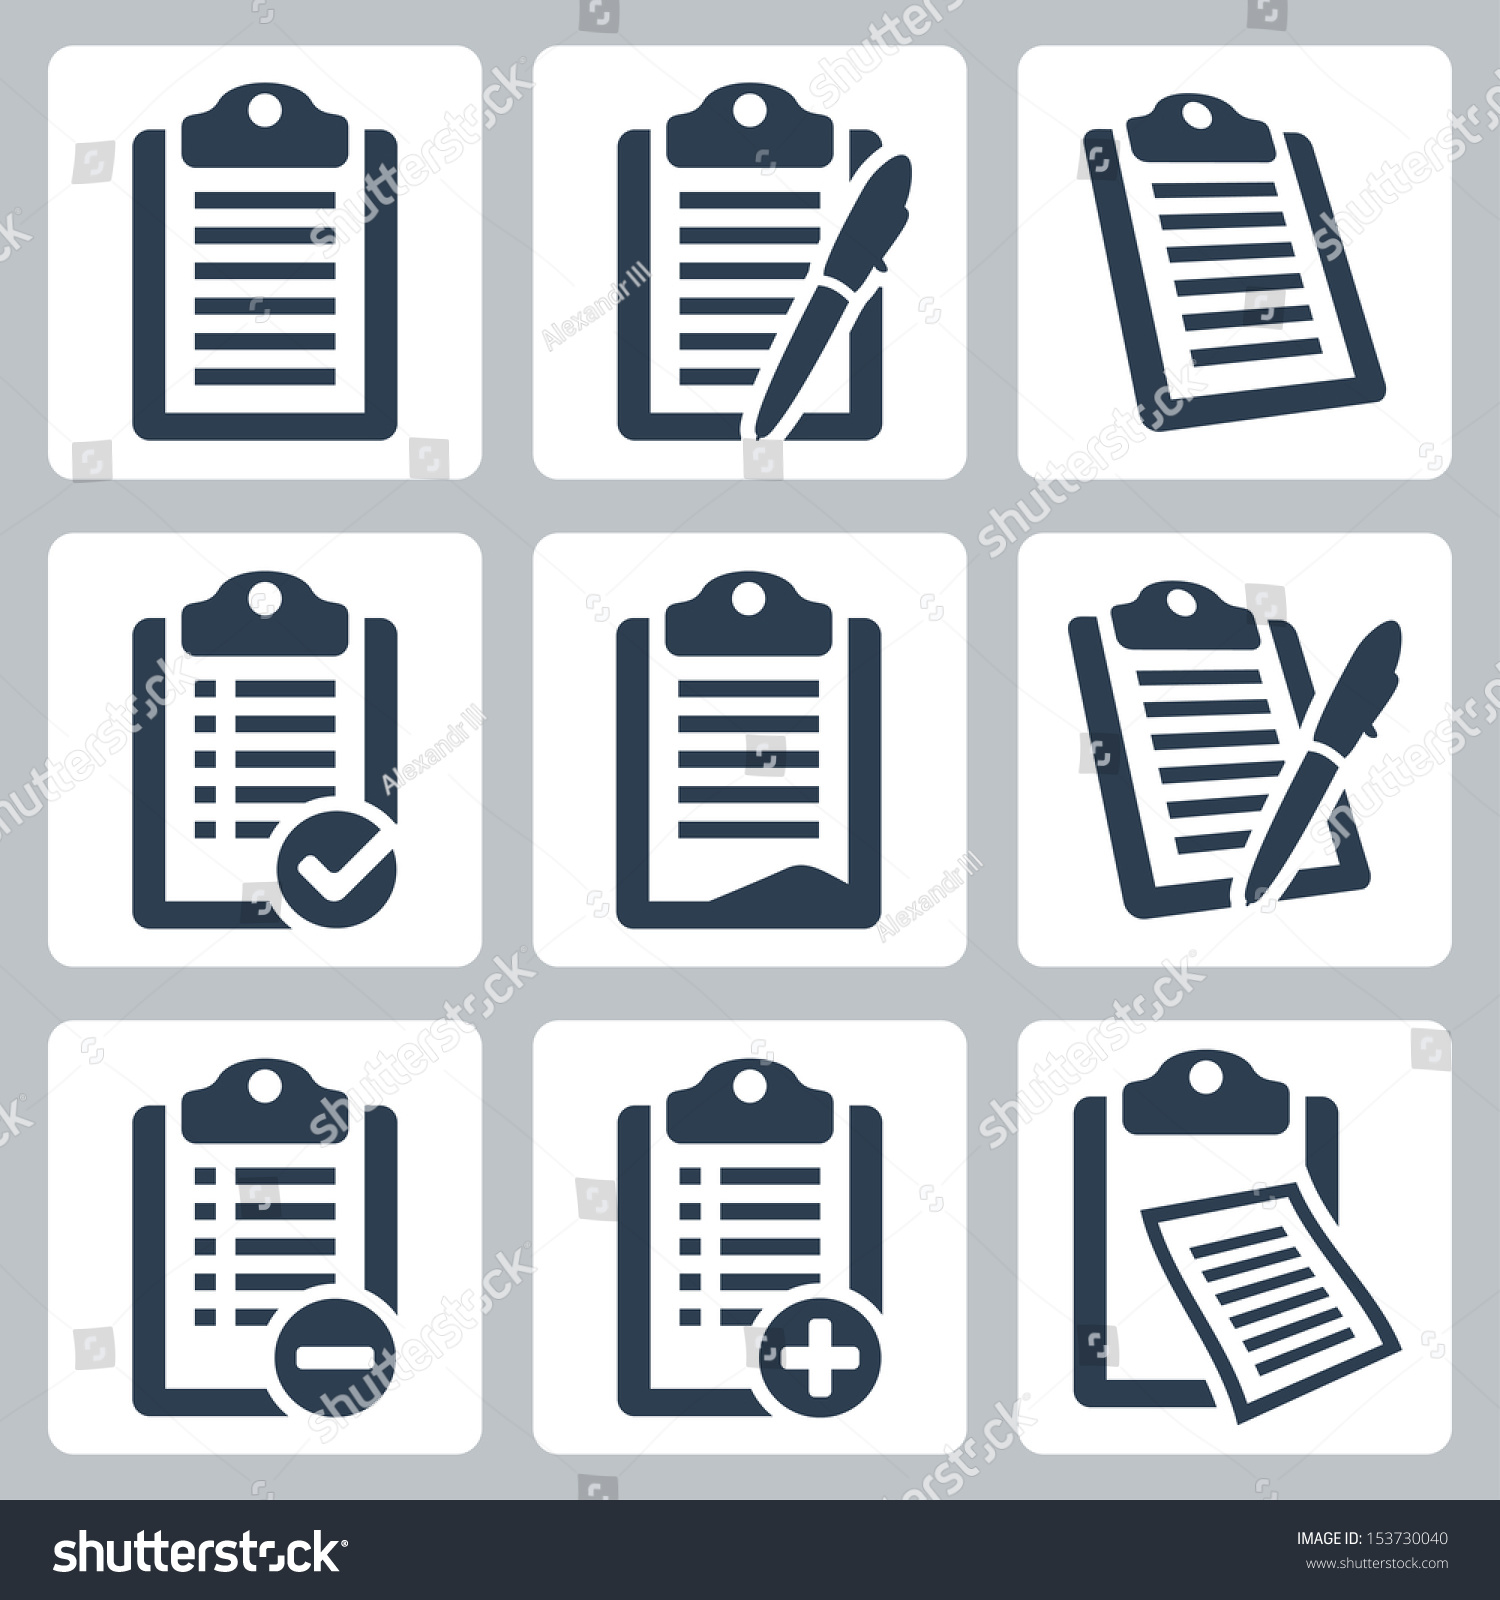 Vector Isolated Clipboard, List Icons Set - 153730040 : Shutterstock